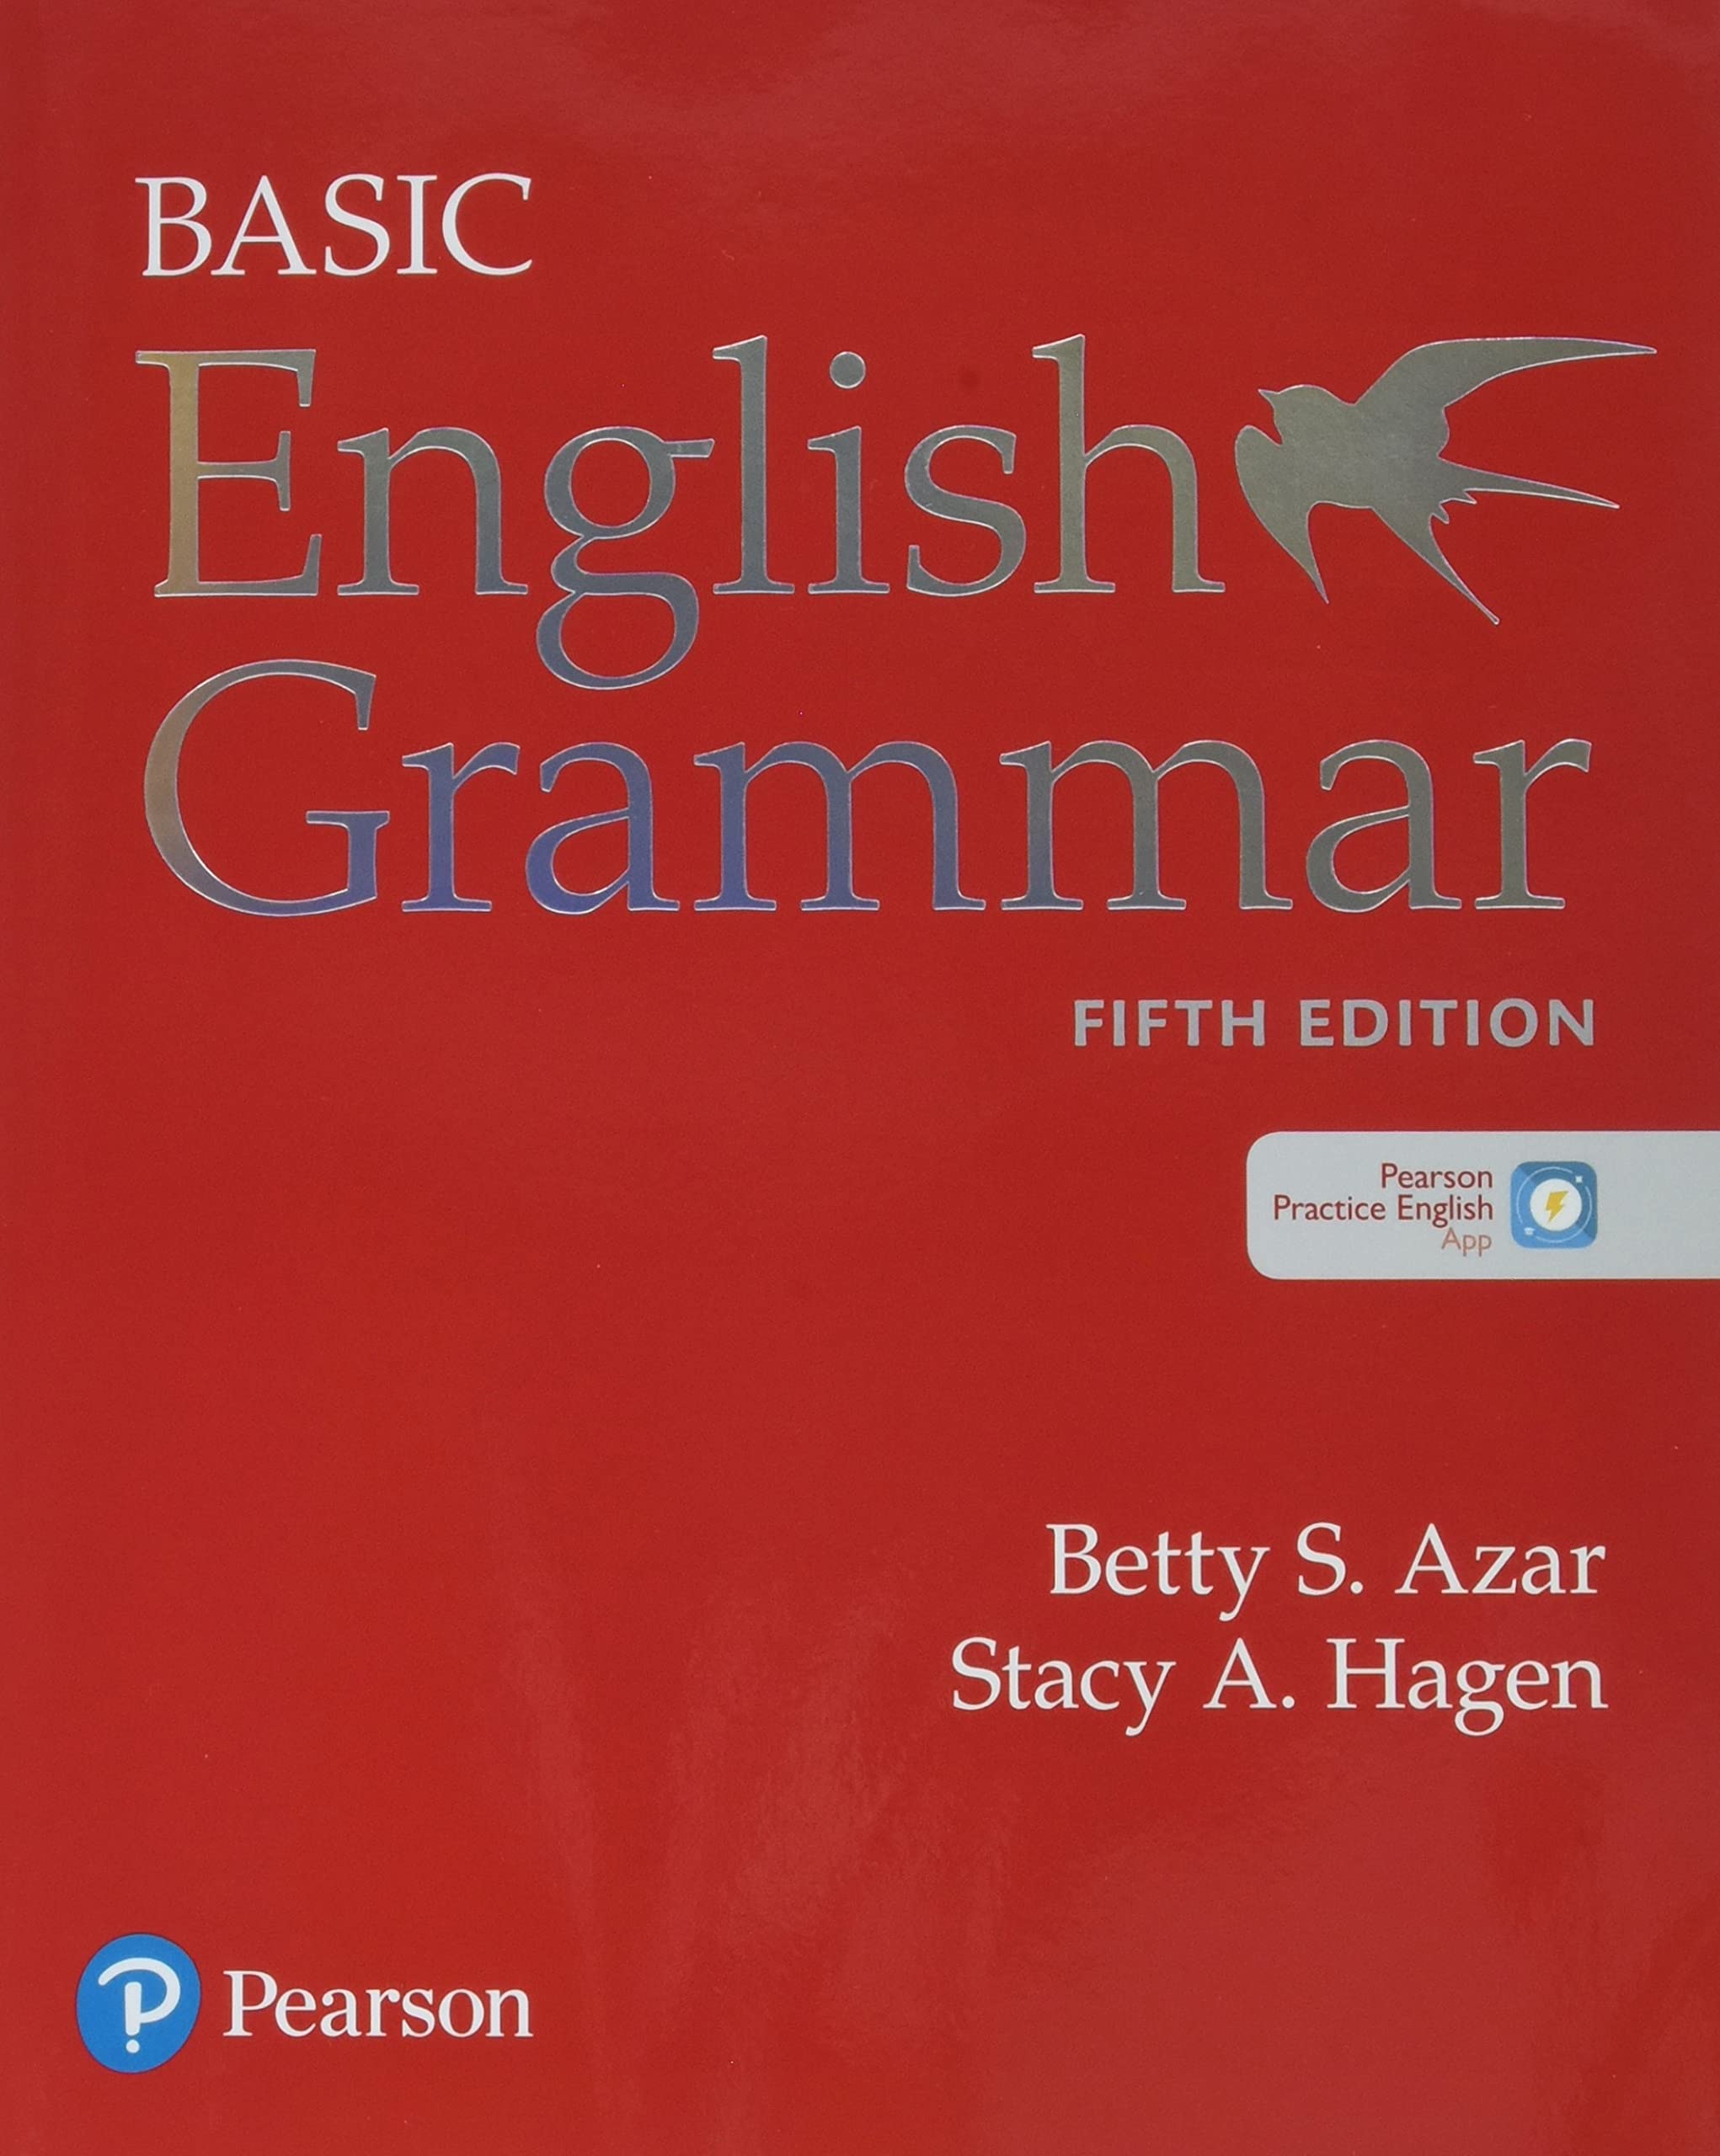 basic-english-grammar-5th-edition-student-book-with-app-international-edition-by-betty-s